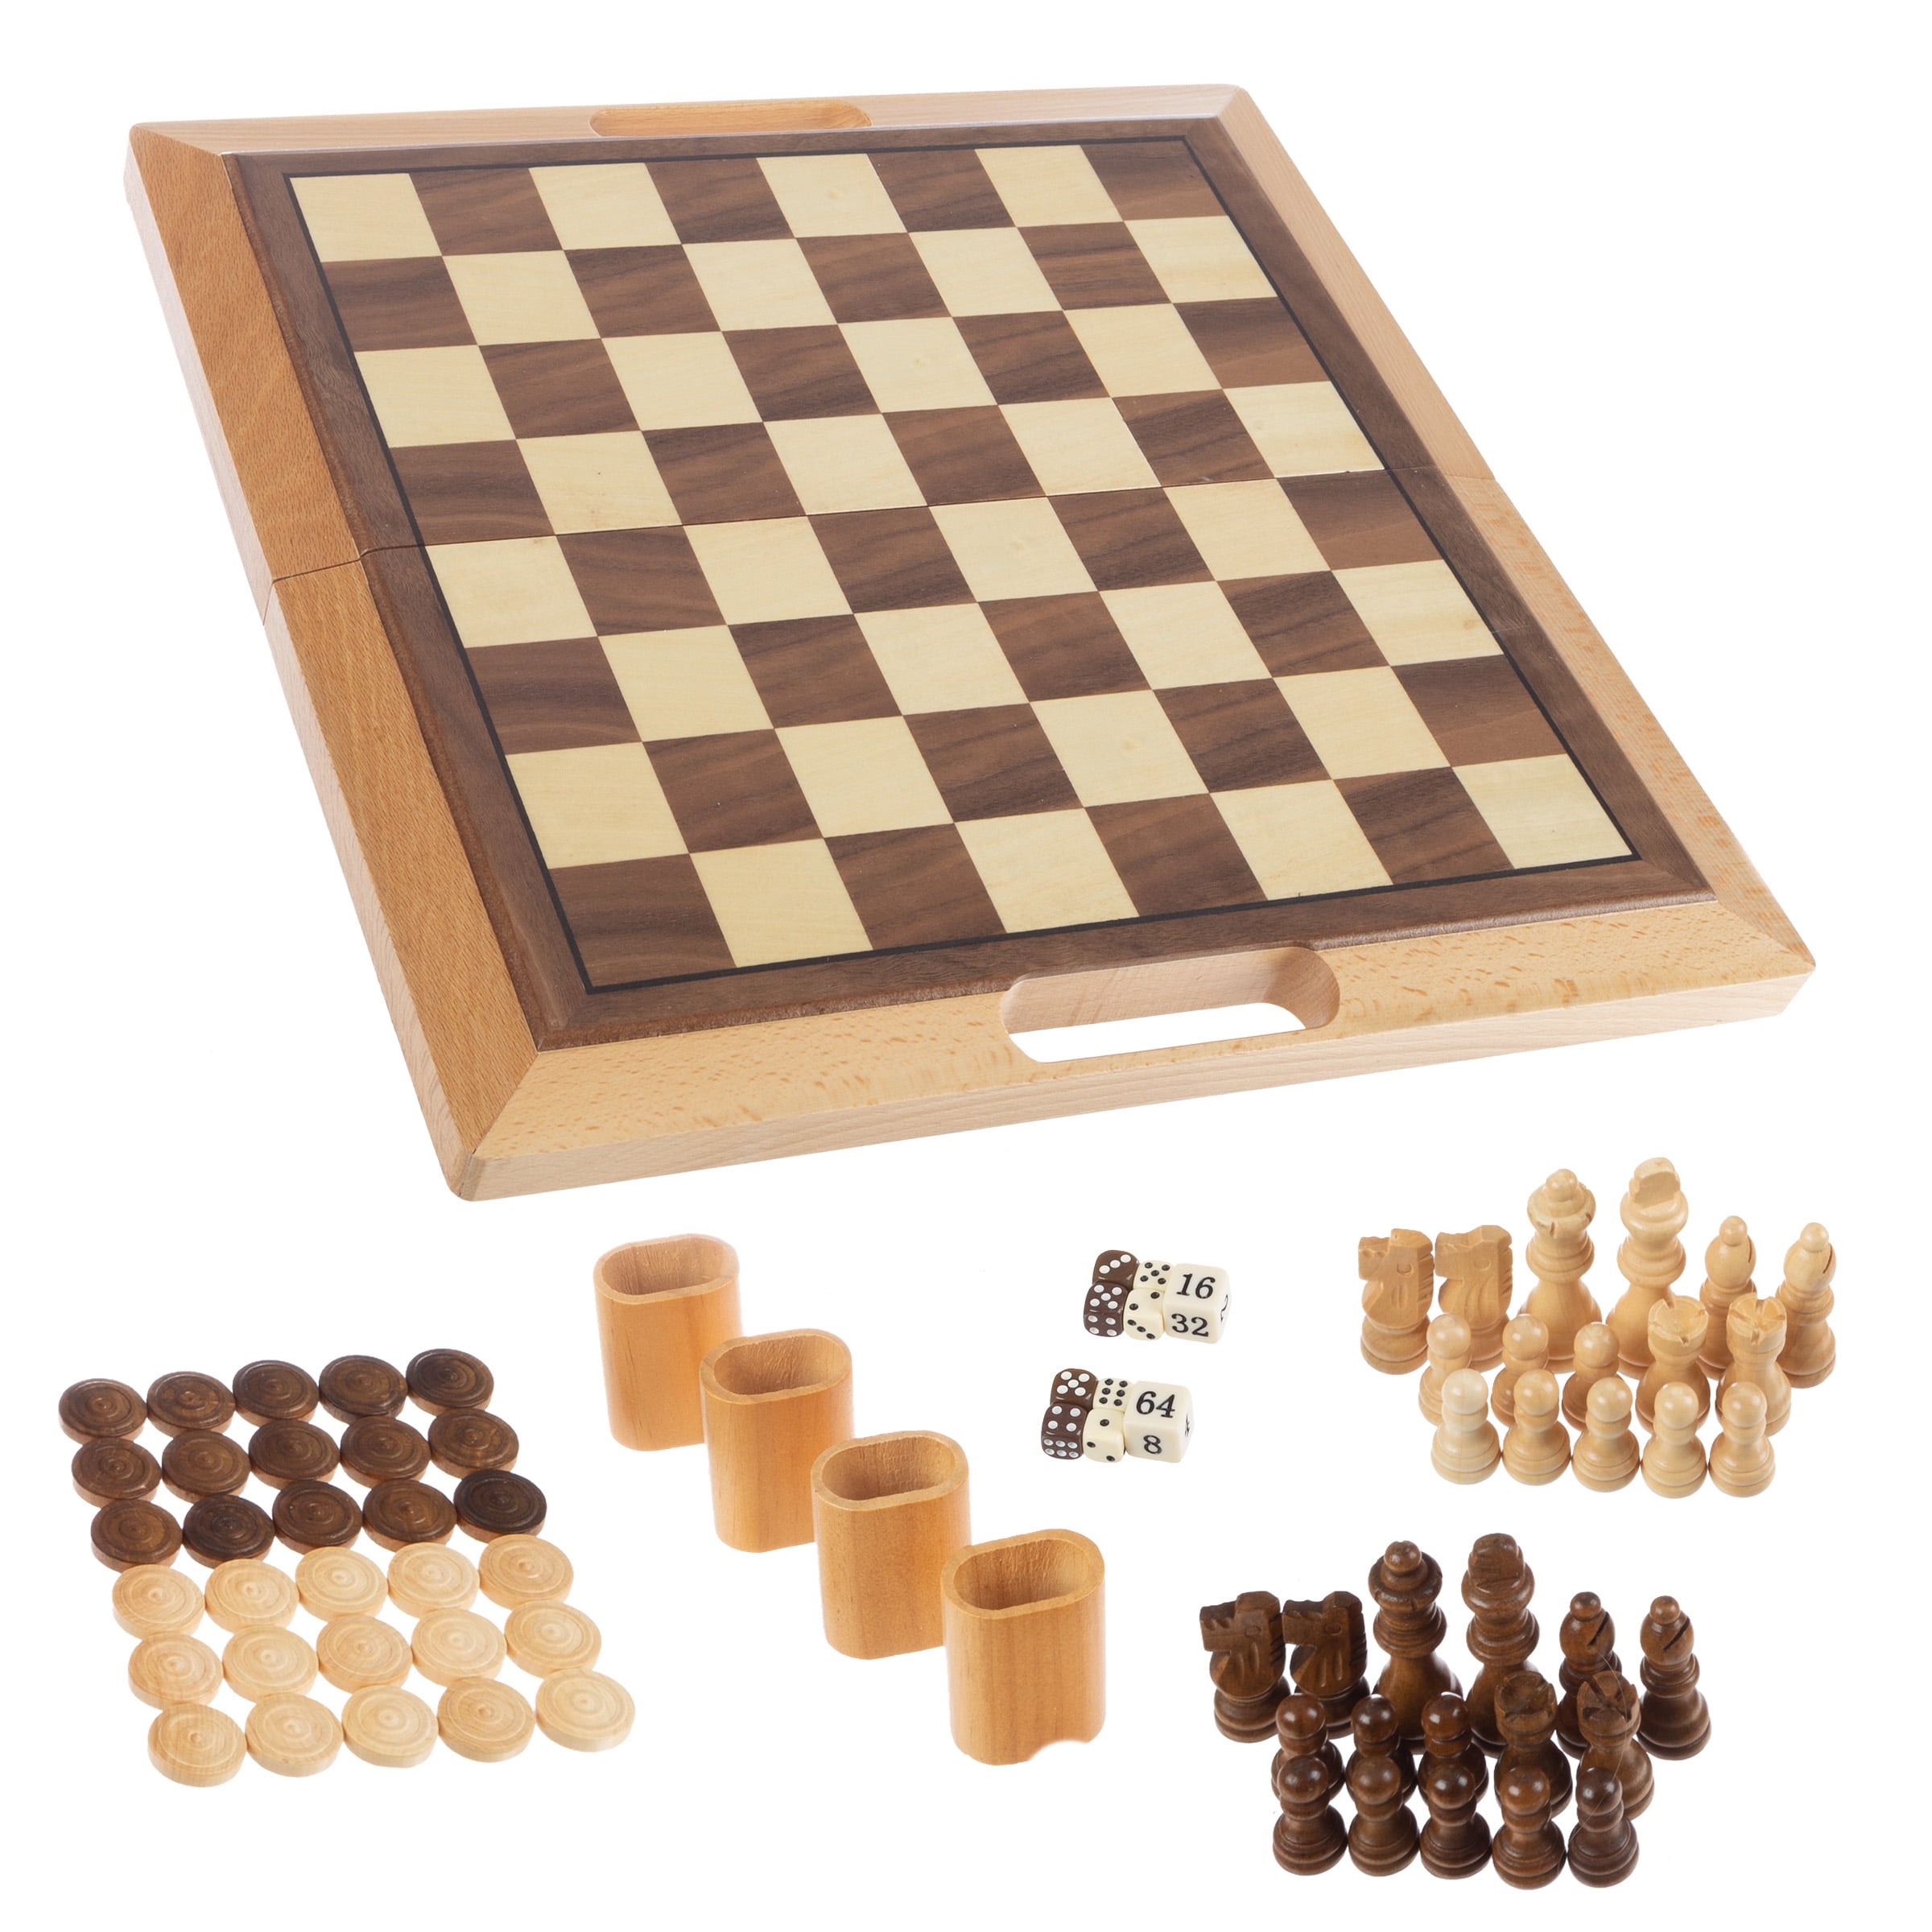 3 in 1 Chess Backgammon Draughts Deluxe Wooden Games Set Global Gizmos 50740 